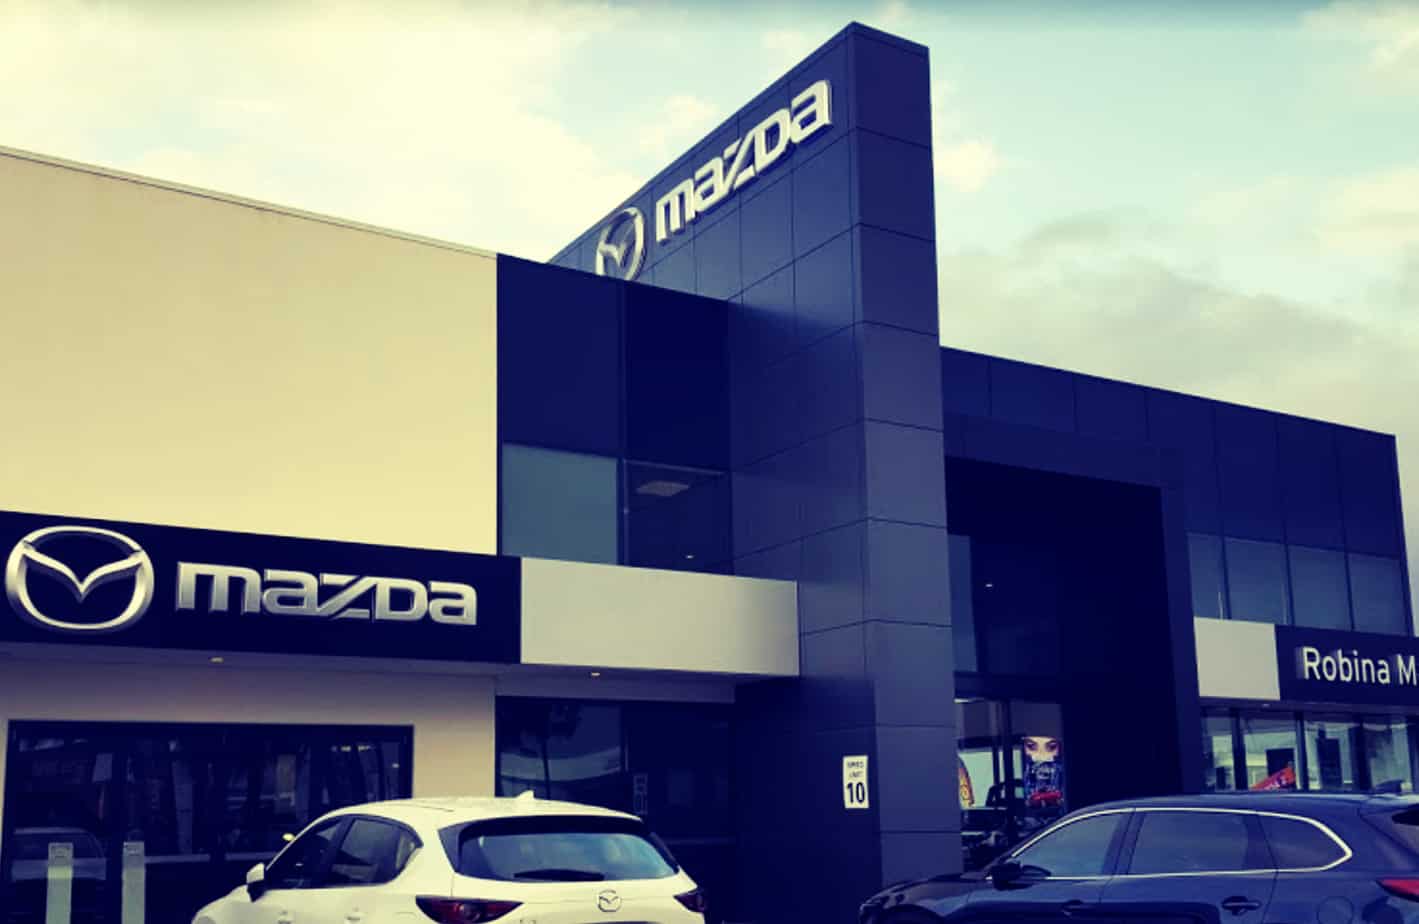 mazda dealer in robina, queensland car dealer near me used cars and new cars